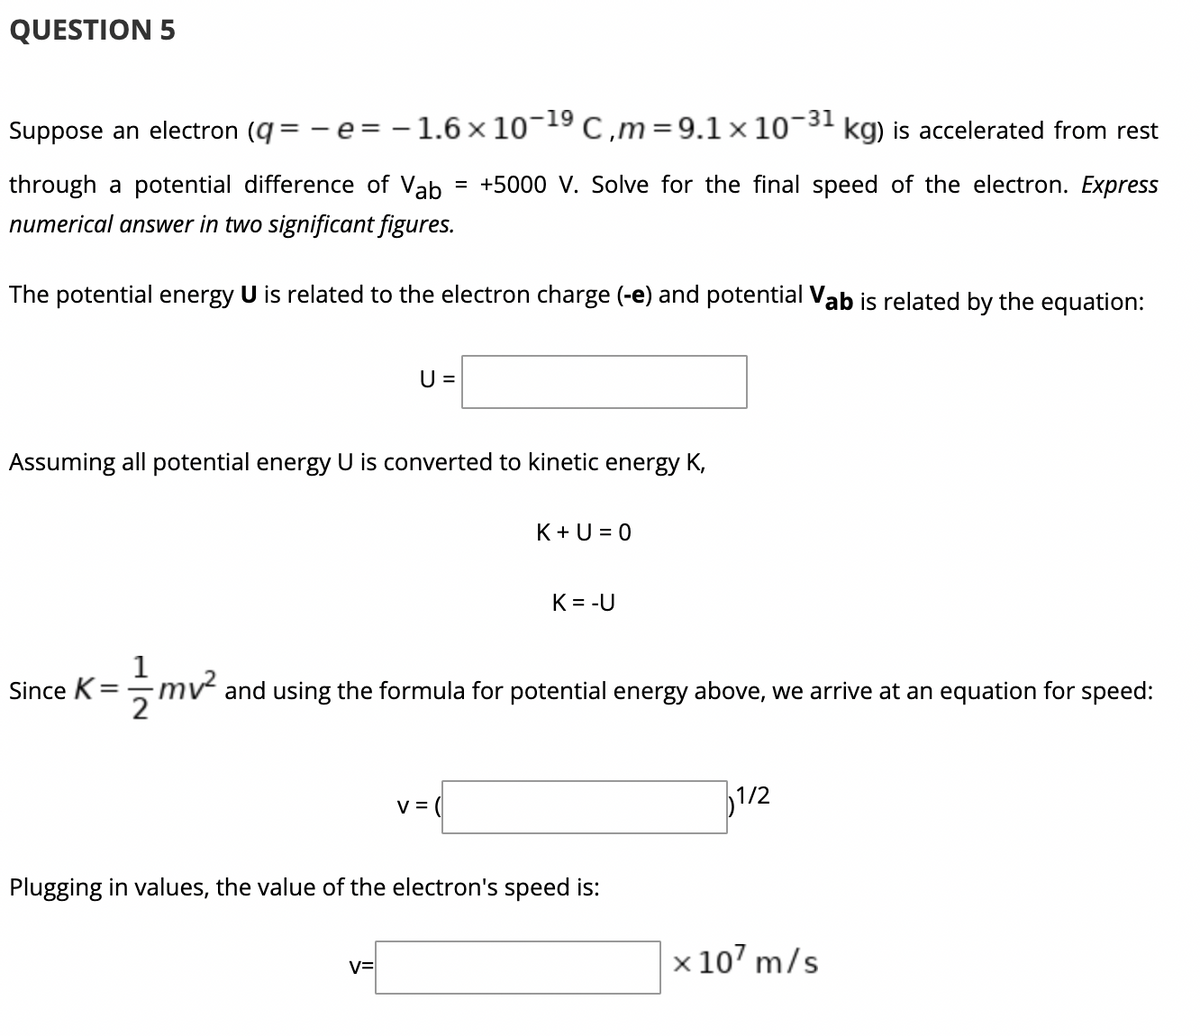 QUESTION 5
Suppose an electron (q = - e= - 1.6 x 10¬19 C,m=9.1 ×10-
-31
kg) is accelerated from rest
through a potential difference of Vab
= +5000 V. Solve for the final speed of the electron. Express
numerical answer in two significant figures.
The potential energy U is related to the electron charge (-e) and potential Vab is related by the equation:
U =
Assuming all potential energy U is converted to kinetic energy K,
K+ U = 0
K = -U
1
mv and using the formula for potential energy above, we arrive at an equation for speed:
Since K =
v = (
1/2
Plugging in values, the value of the electron's speed is:
x 107 m/s
v=
